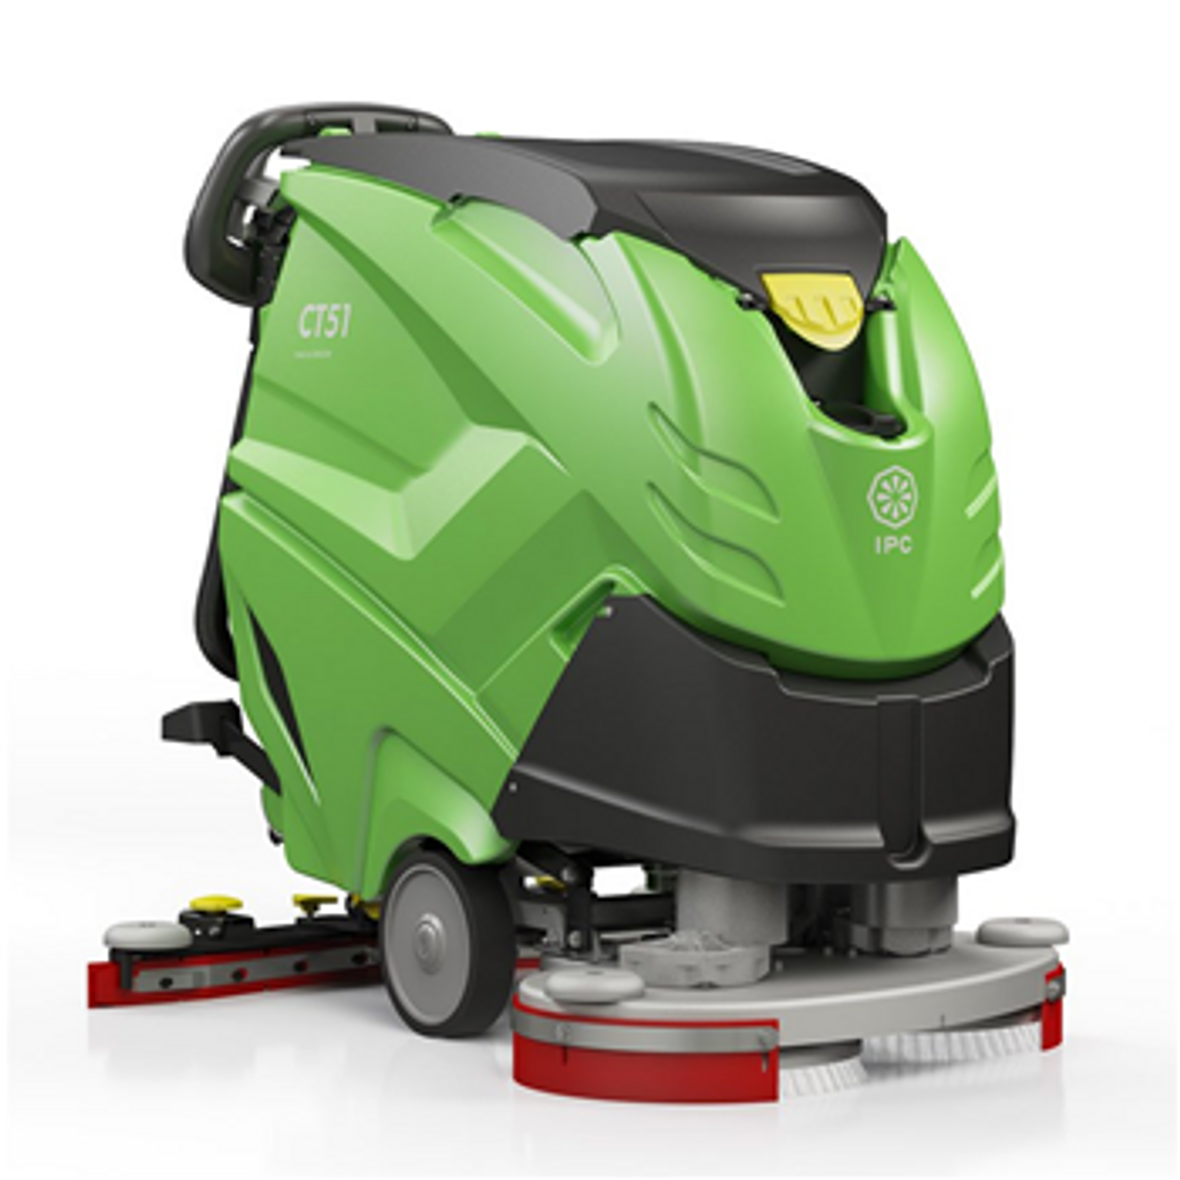 IPC Eagle CT51 XP60 24" Automatic Scrubber, TRACTION DRIVE, Actuated Disc Scrub Head